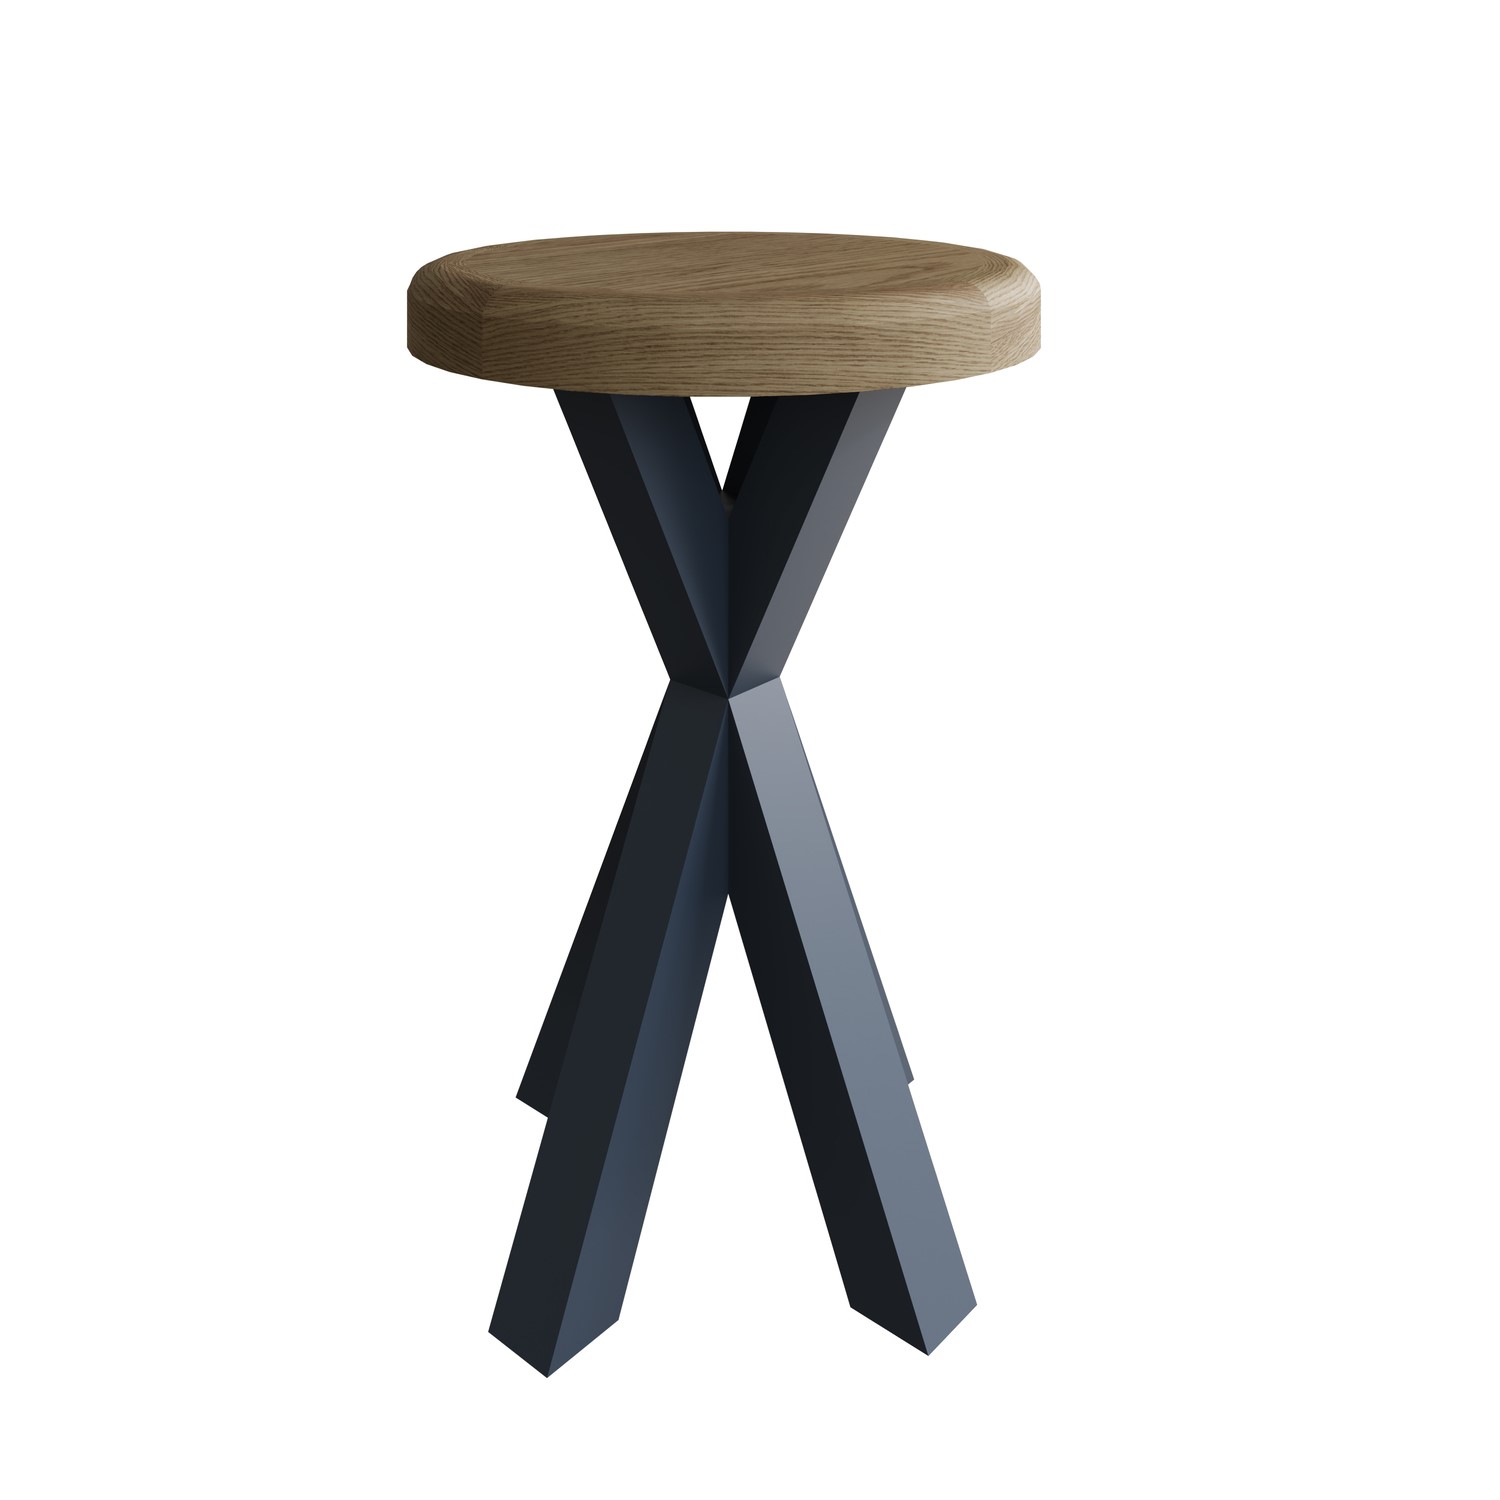 Read more about Oak & blue round side table